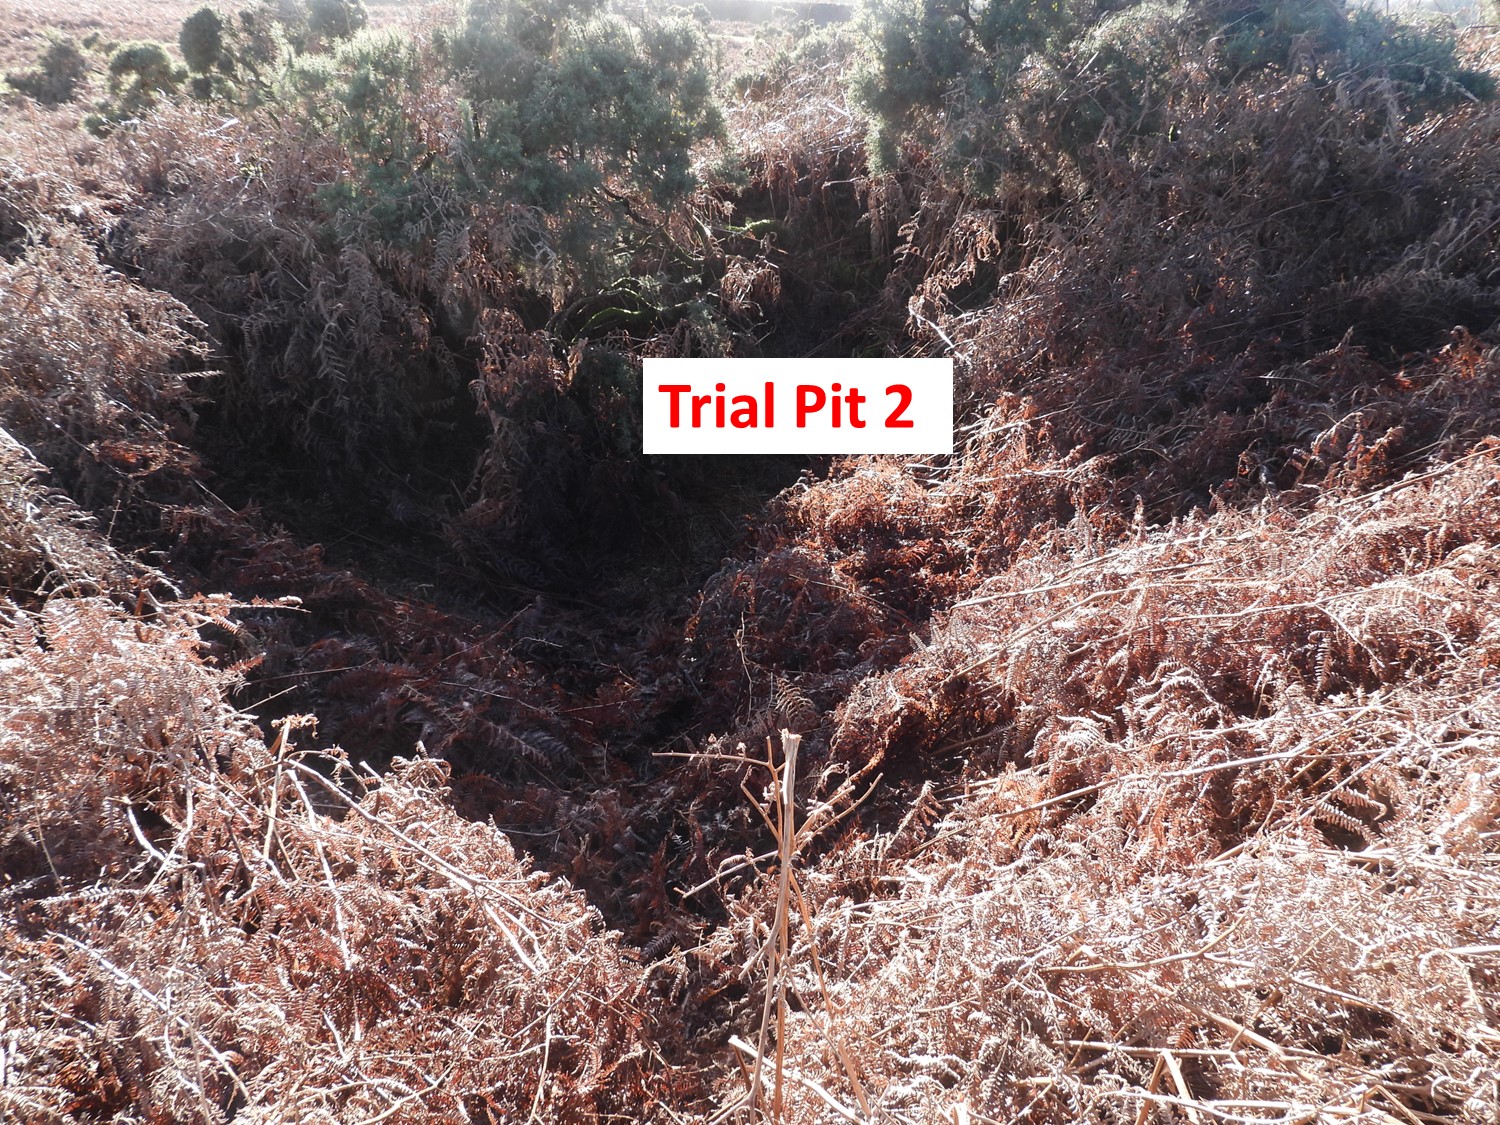 8. Trial Pit 2